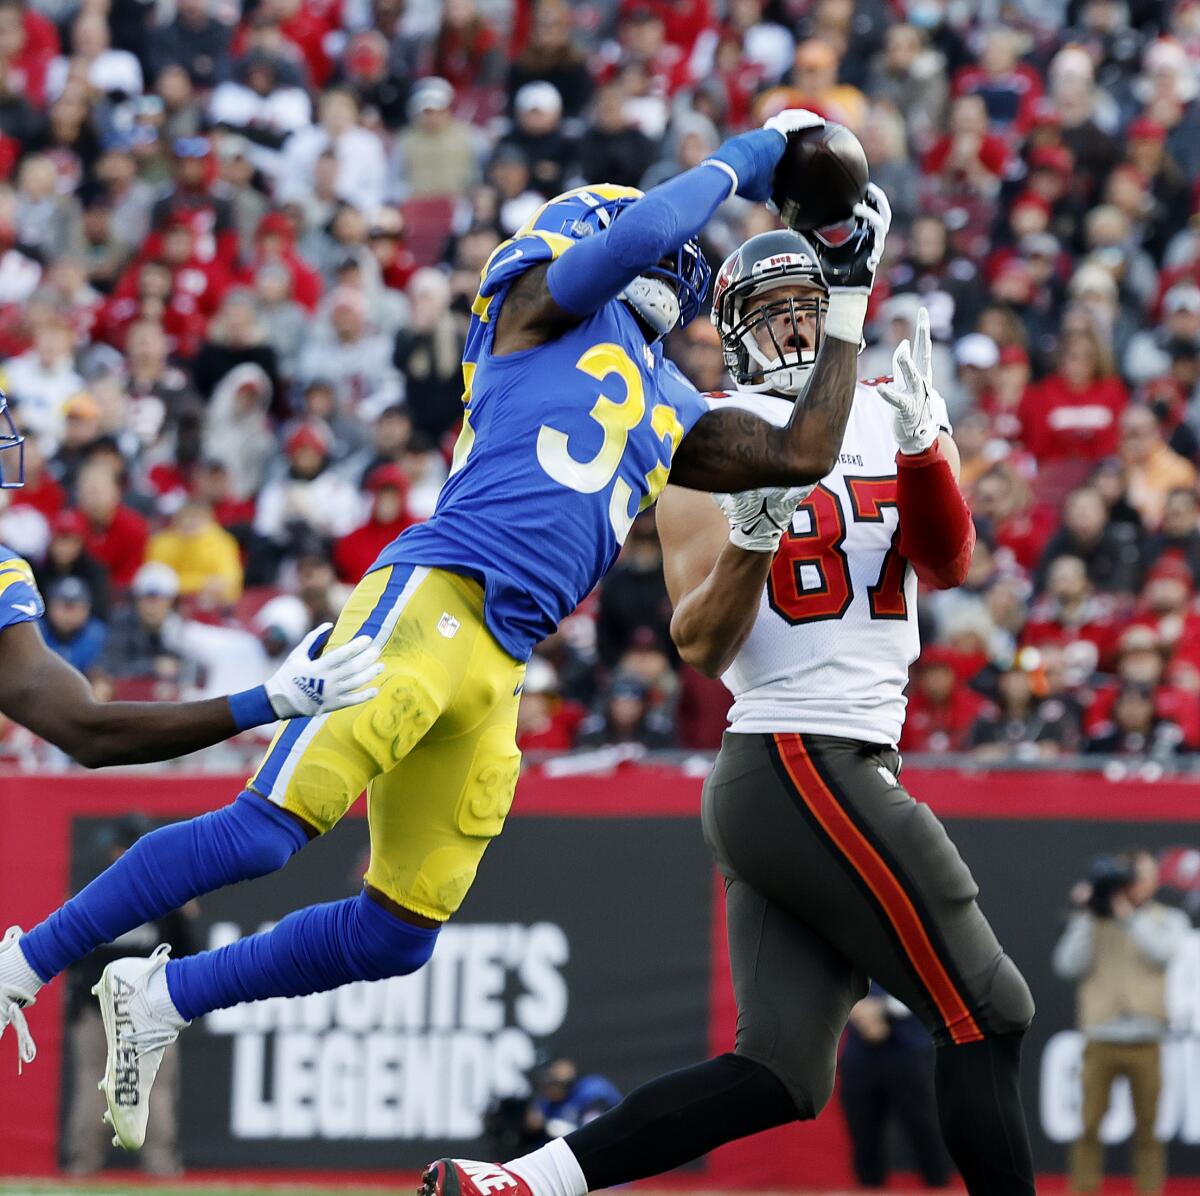  Rams safety Nick Scott (33) intercepts a pass intended for Buccaneers tight end Rob Gronkowski.